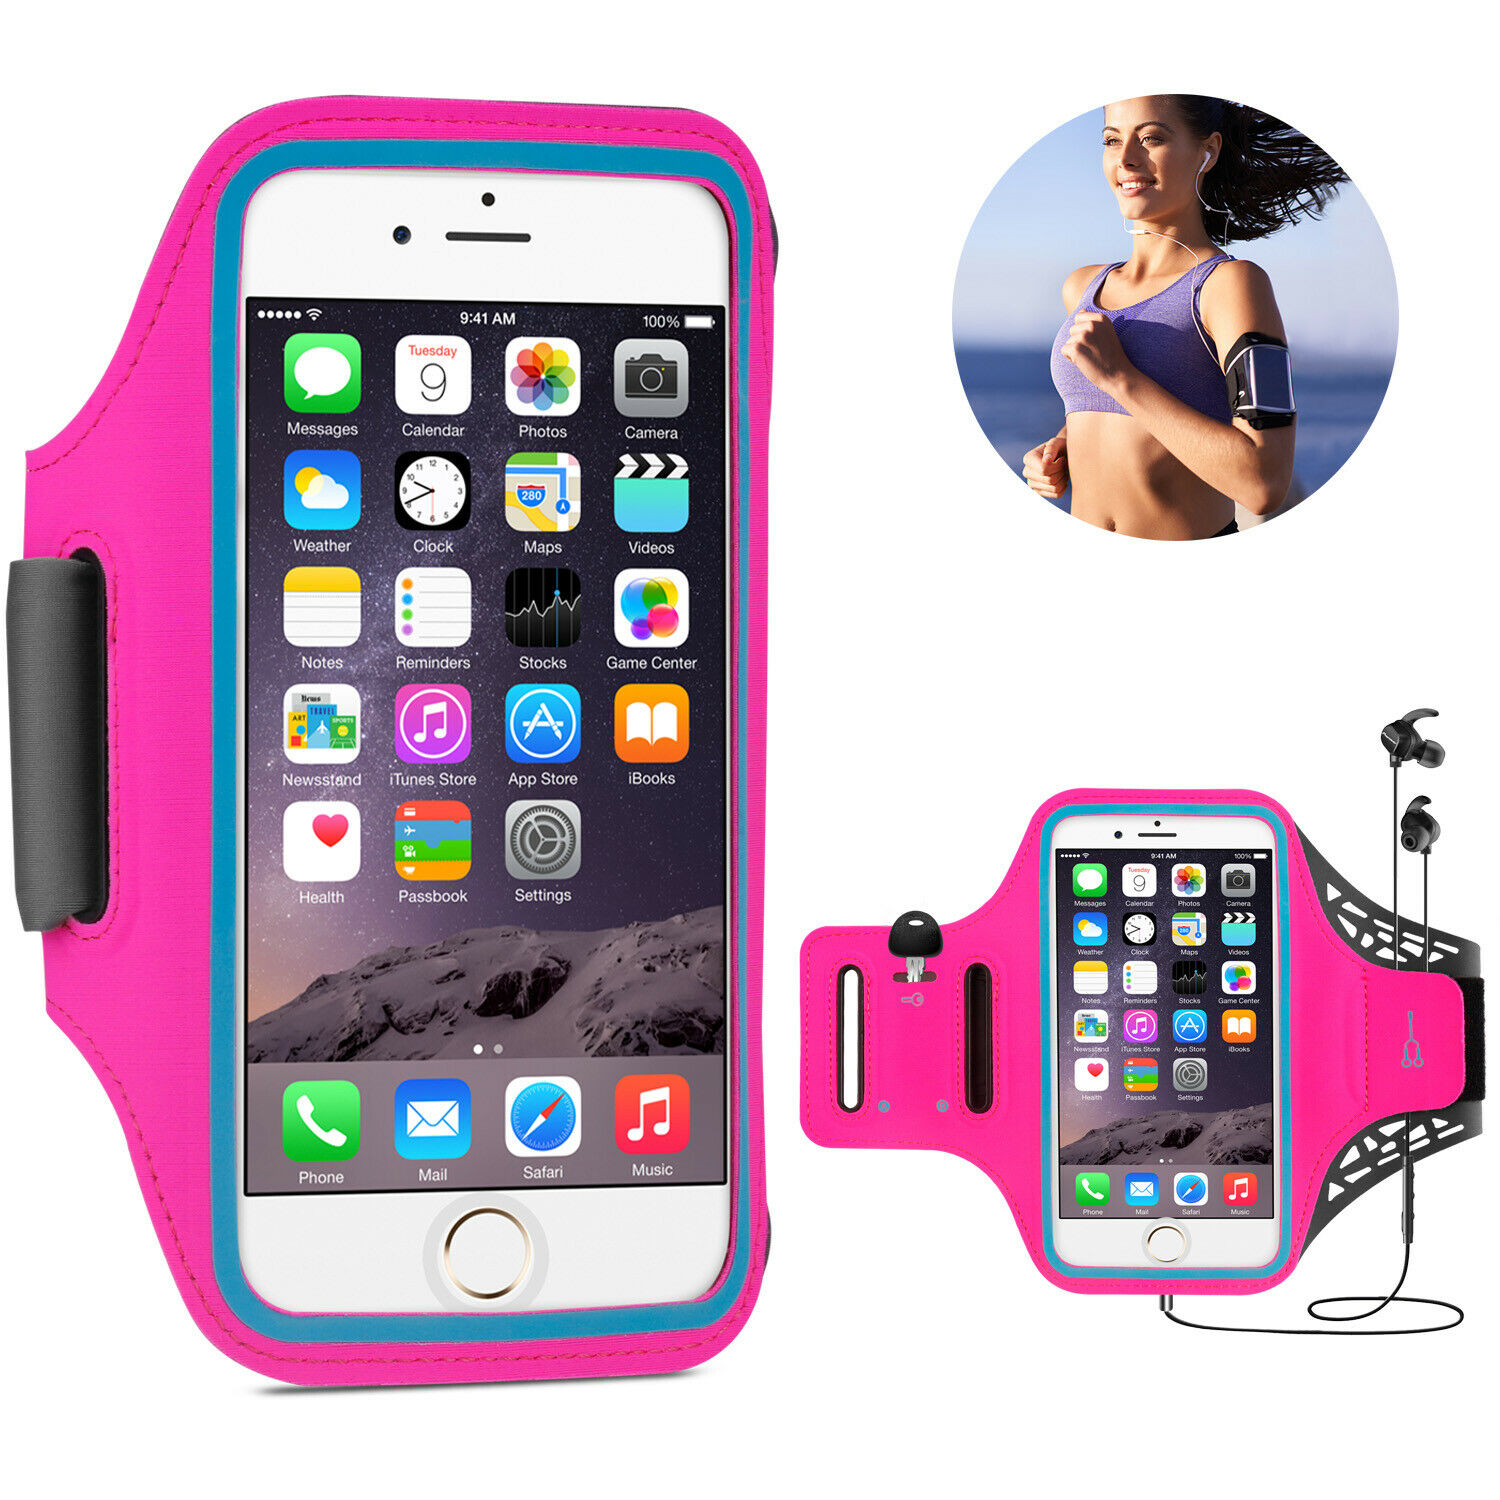 Armband Case Sports Running Jogging Gym Holder Arm Band Bag Pouch For Cell Phone